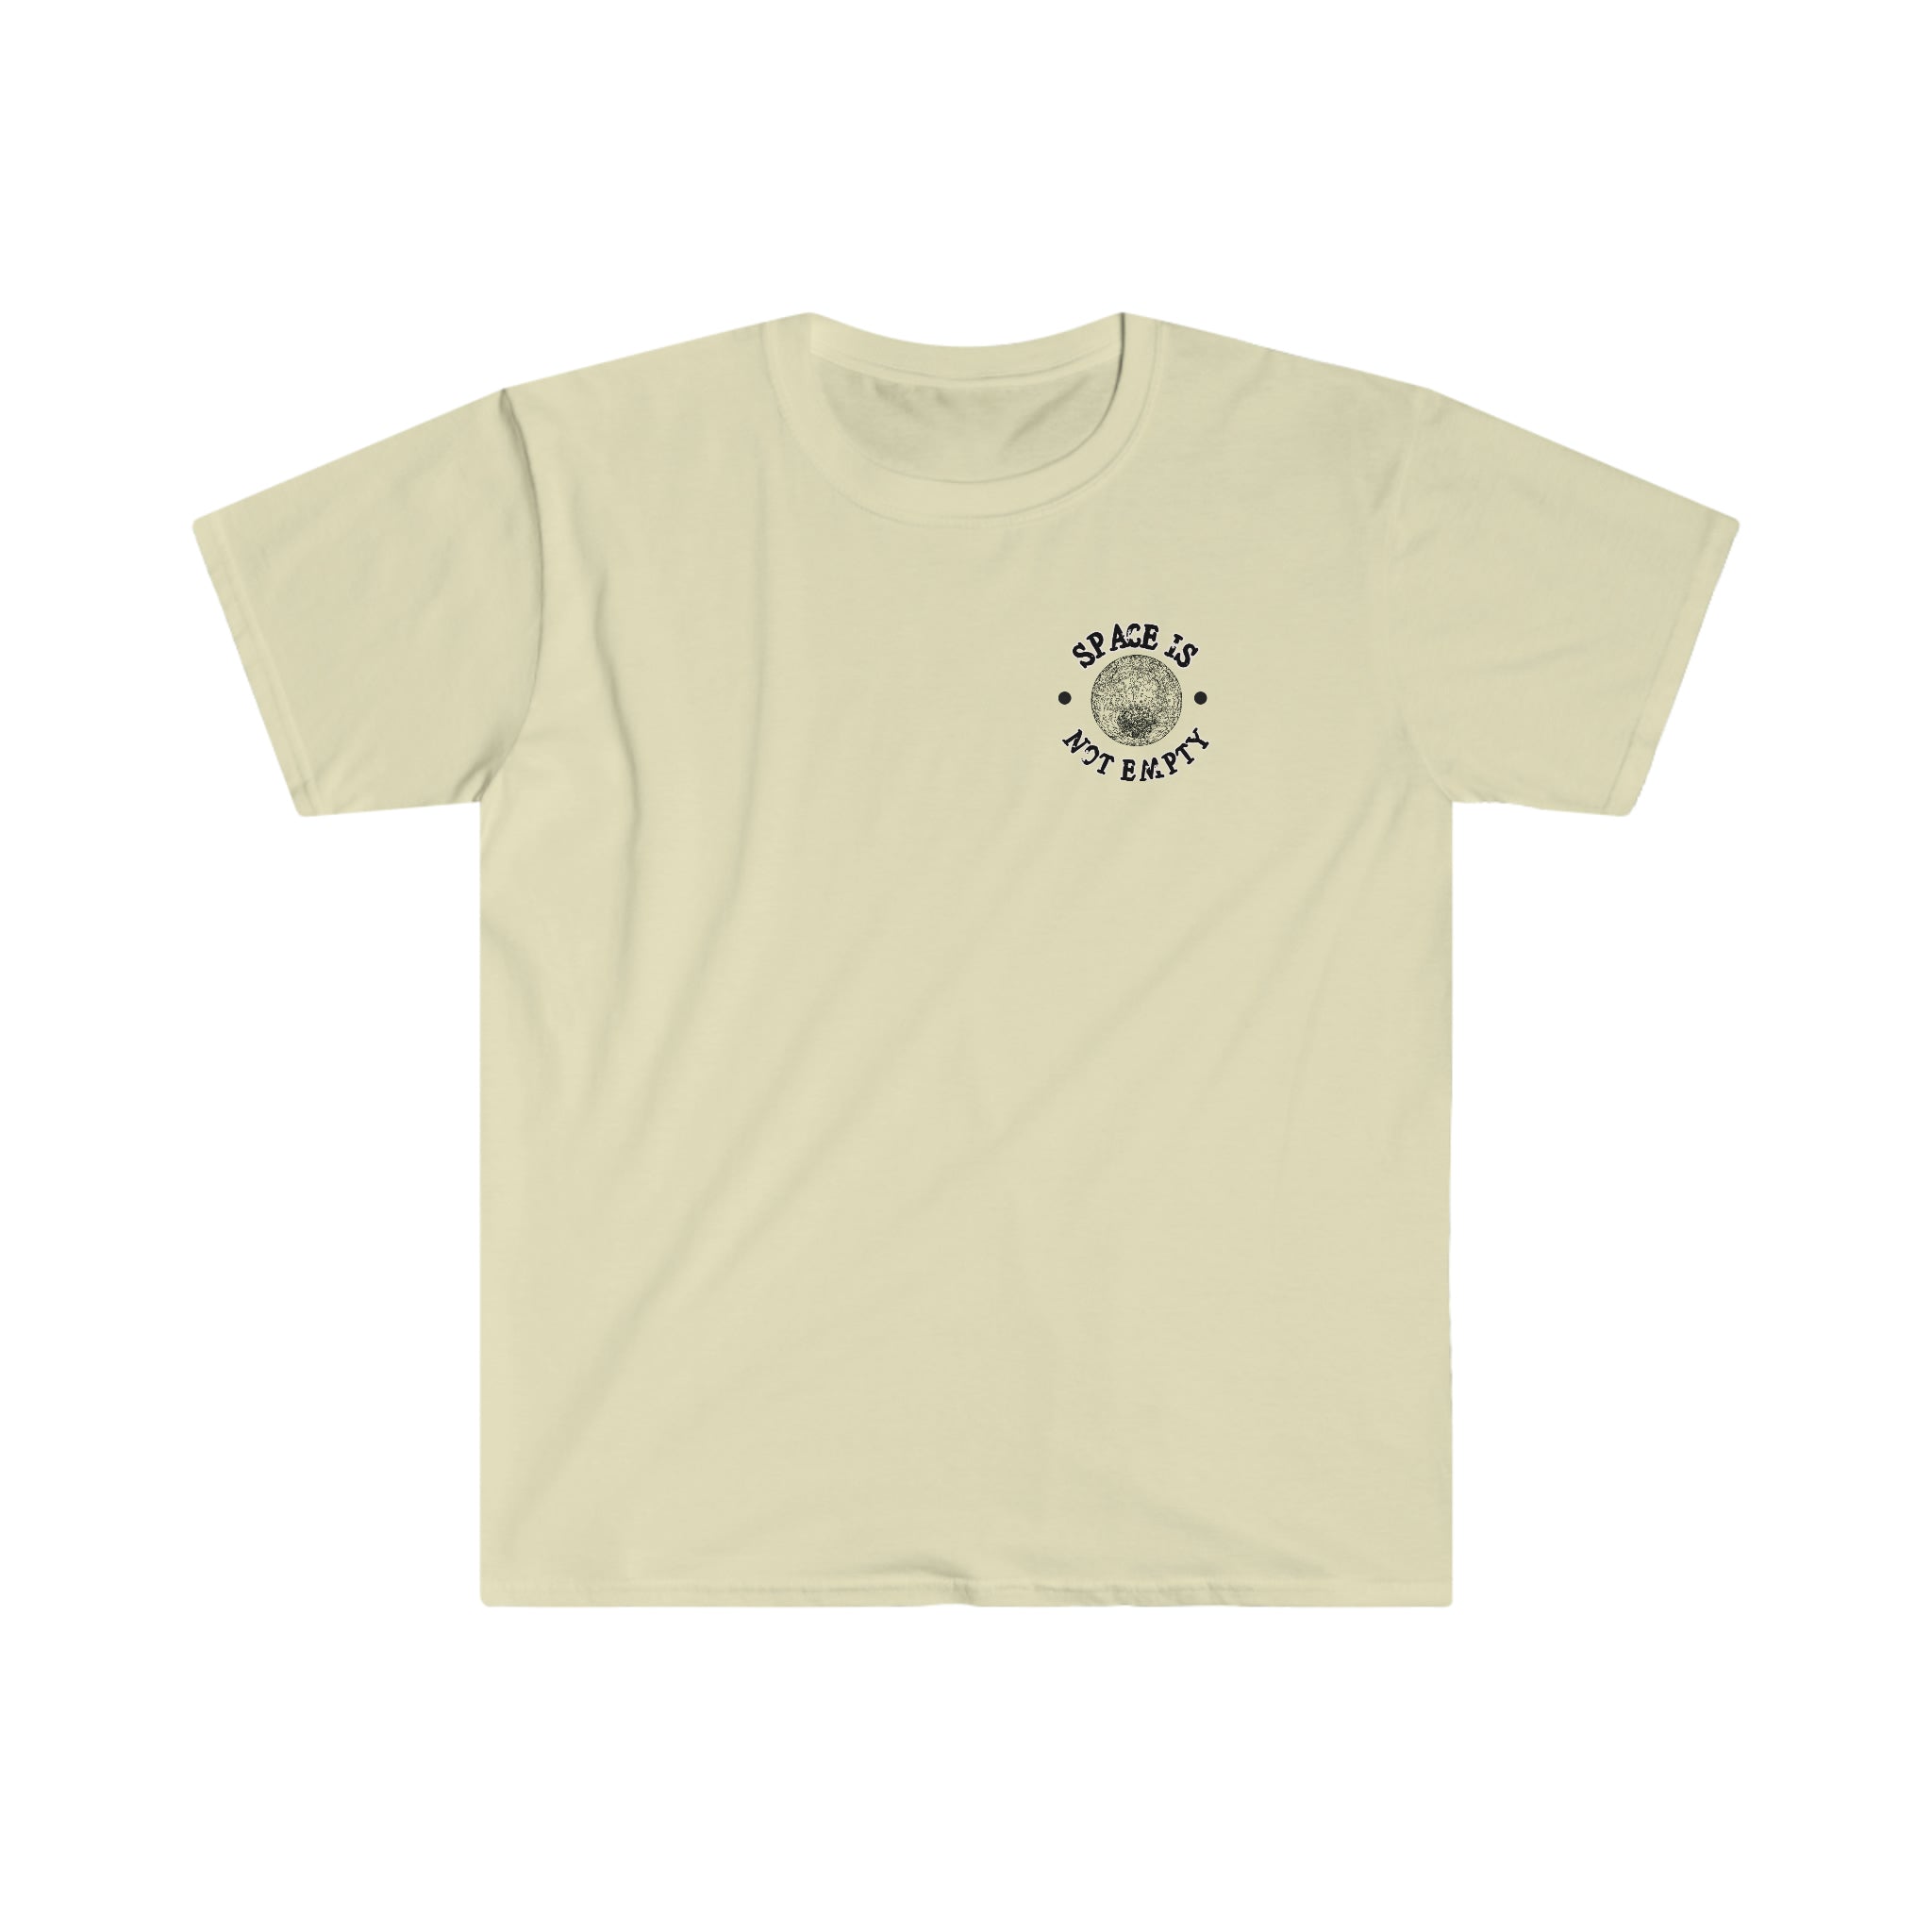 A beige "Save Me From Space" t-shirt featuring a black logo for space enthusiasts.